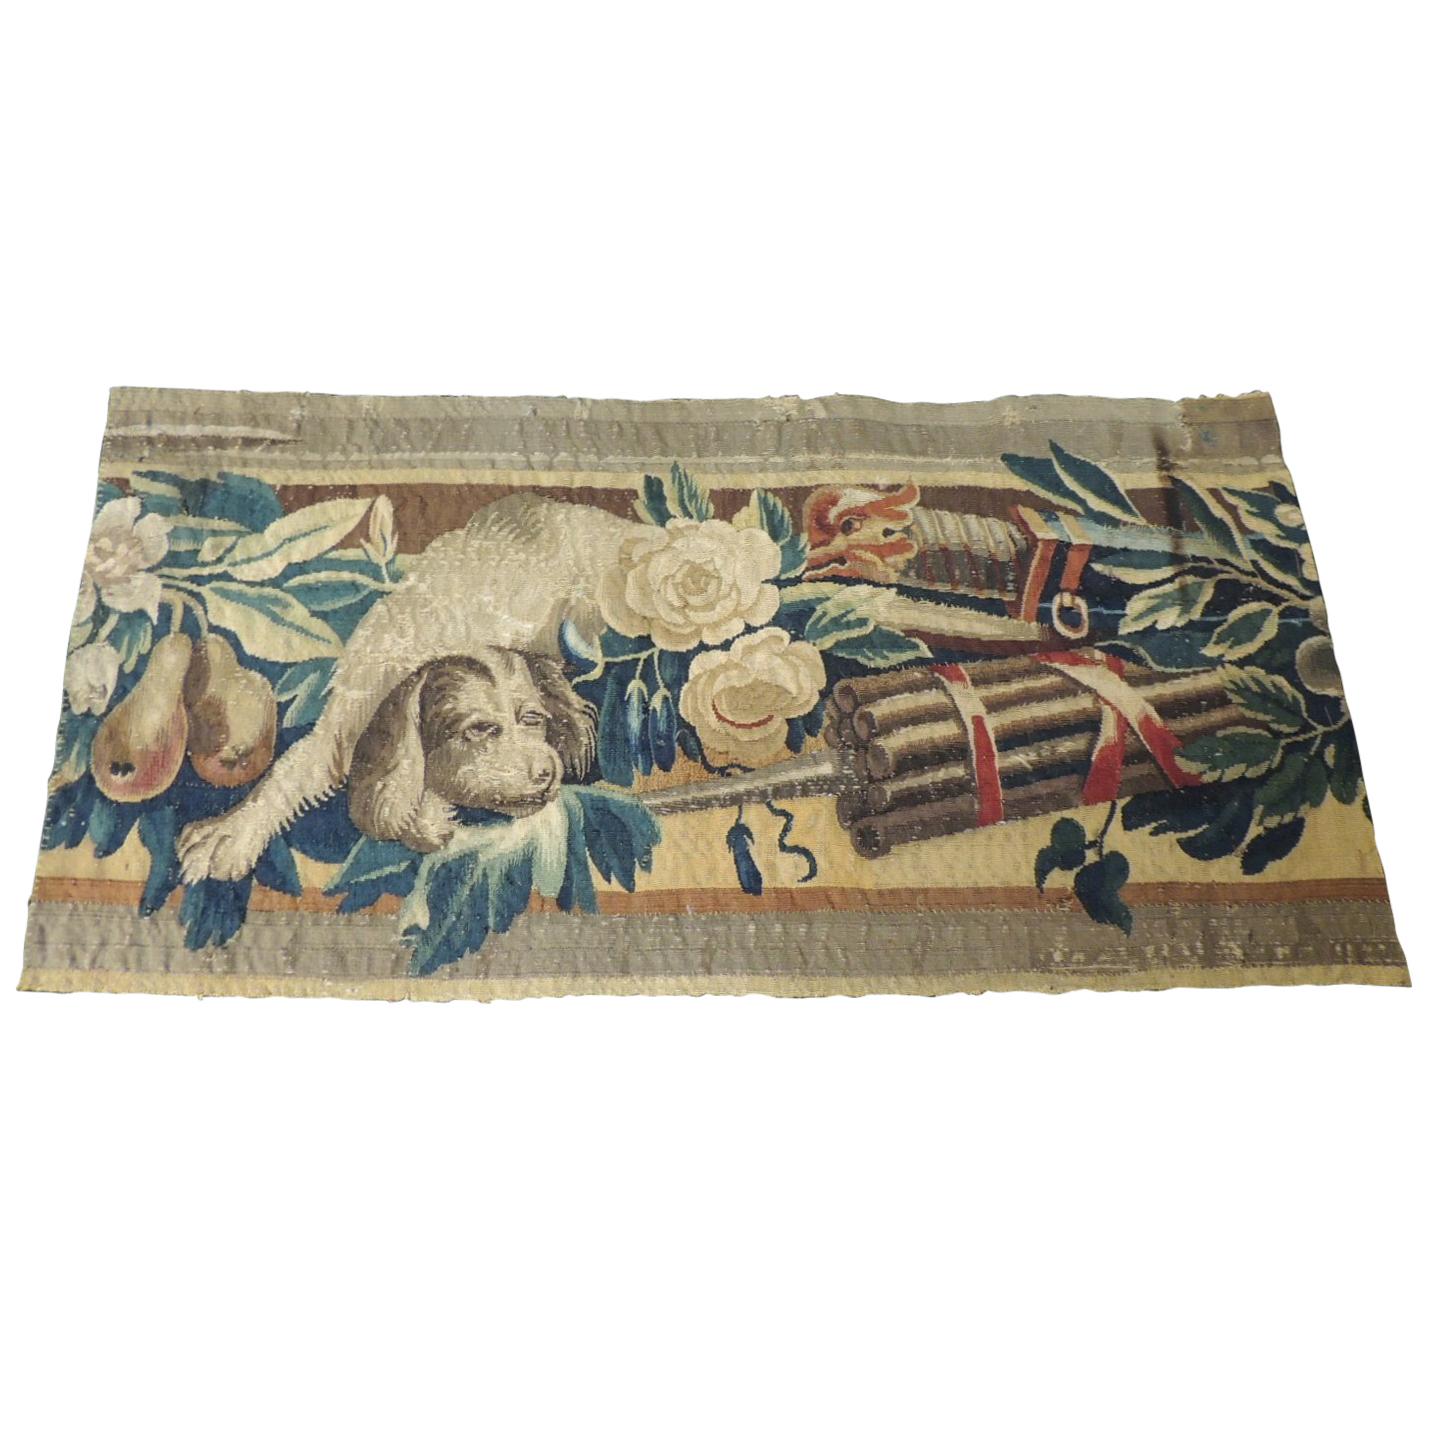 18Th Century Aubusson Tapestry Depicting Dog Fragment